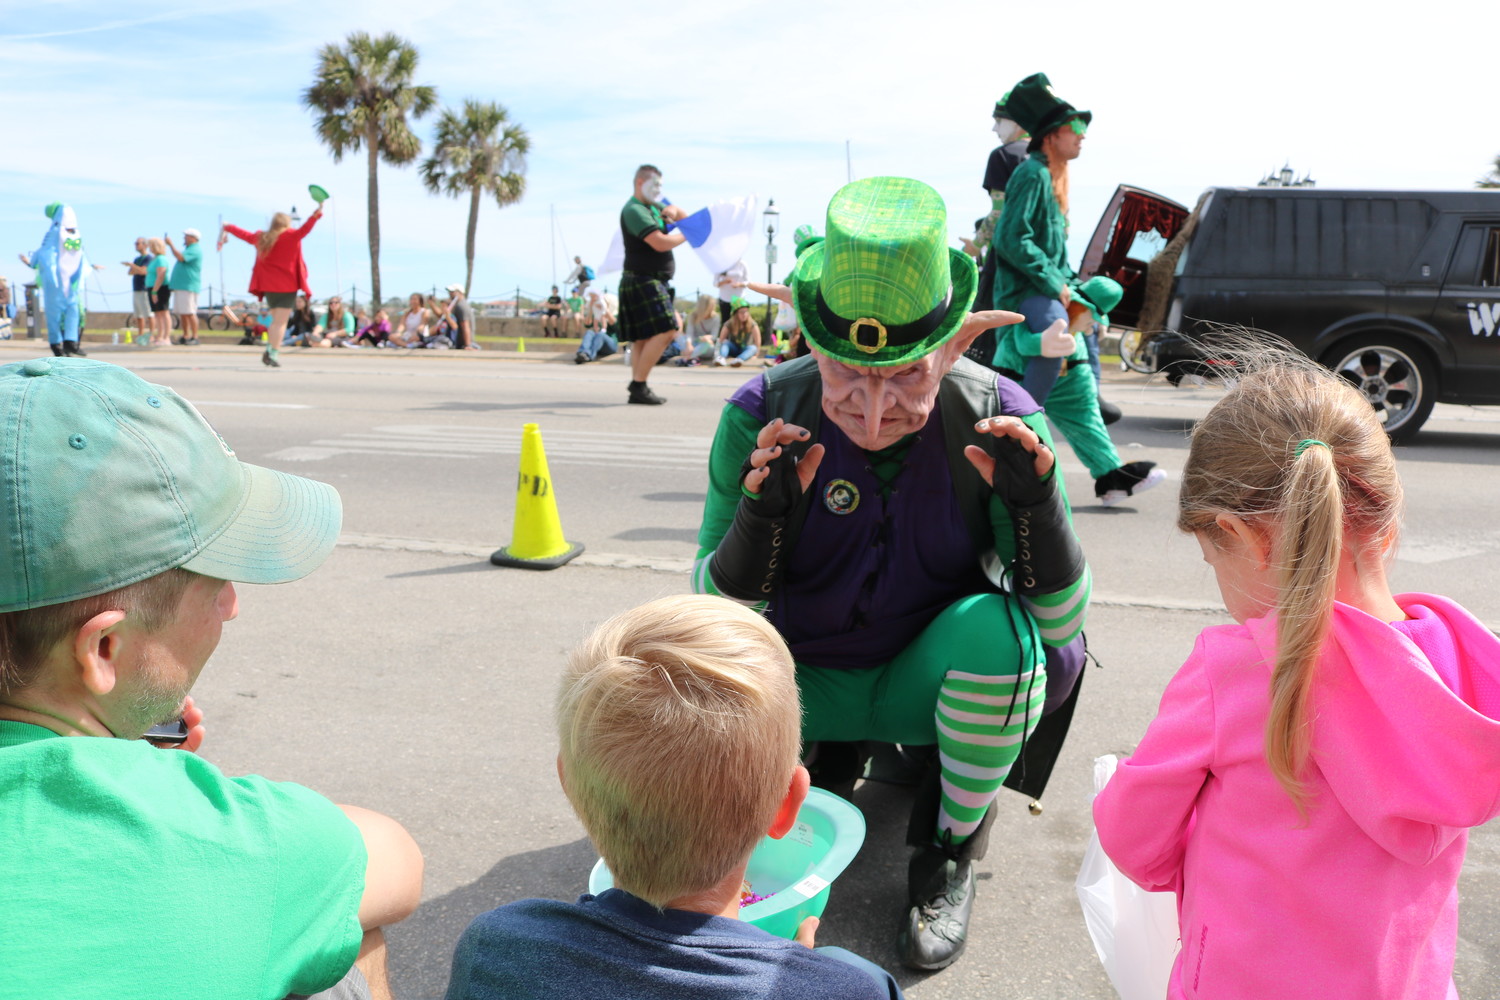 A creepy character pays a visit to a group of kids at the parade.